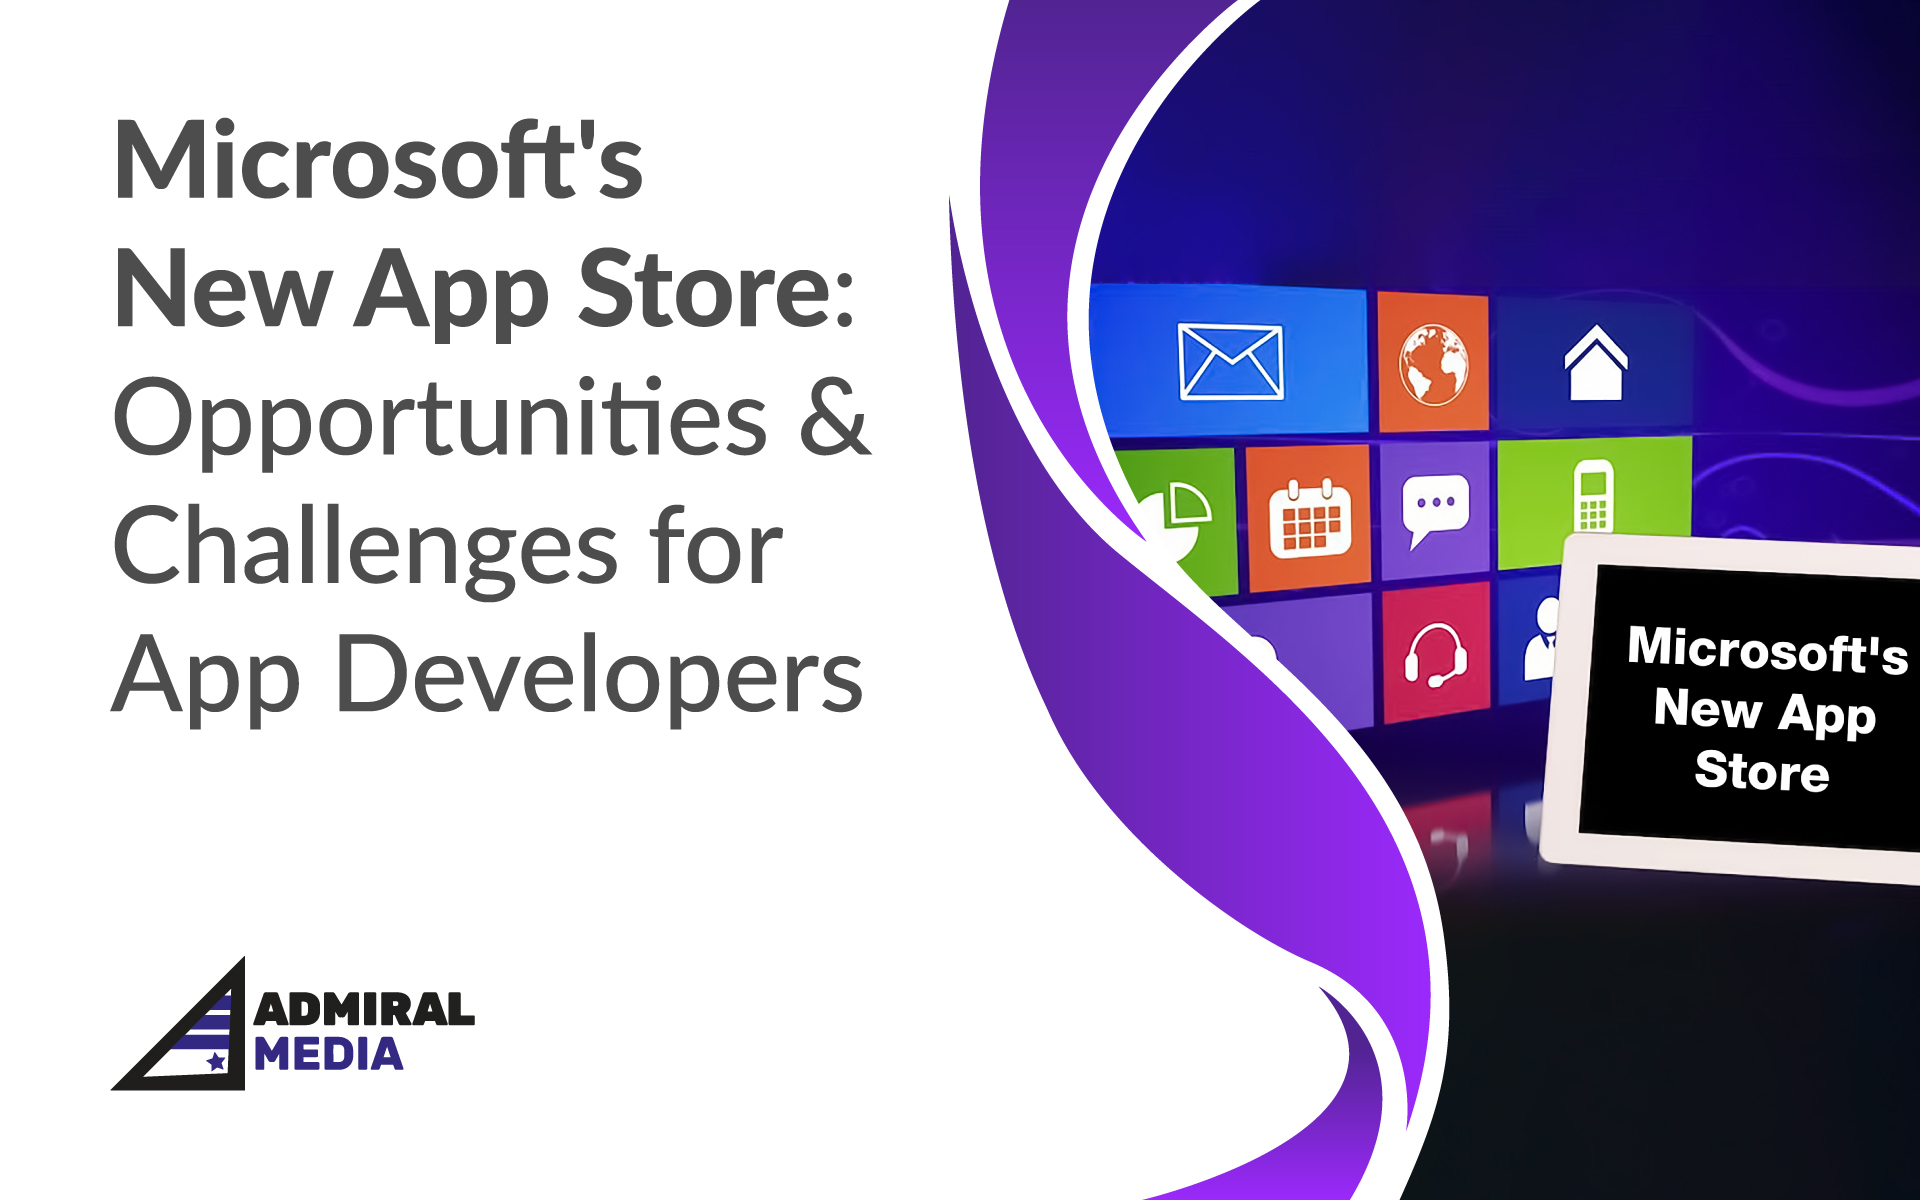 Microsoft's New App Store by Admiral Media